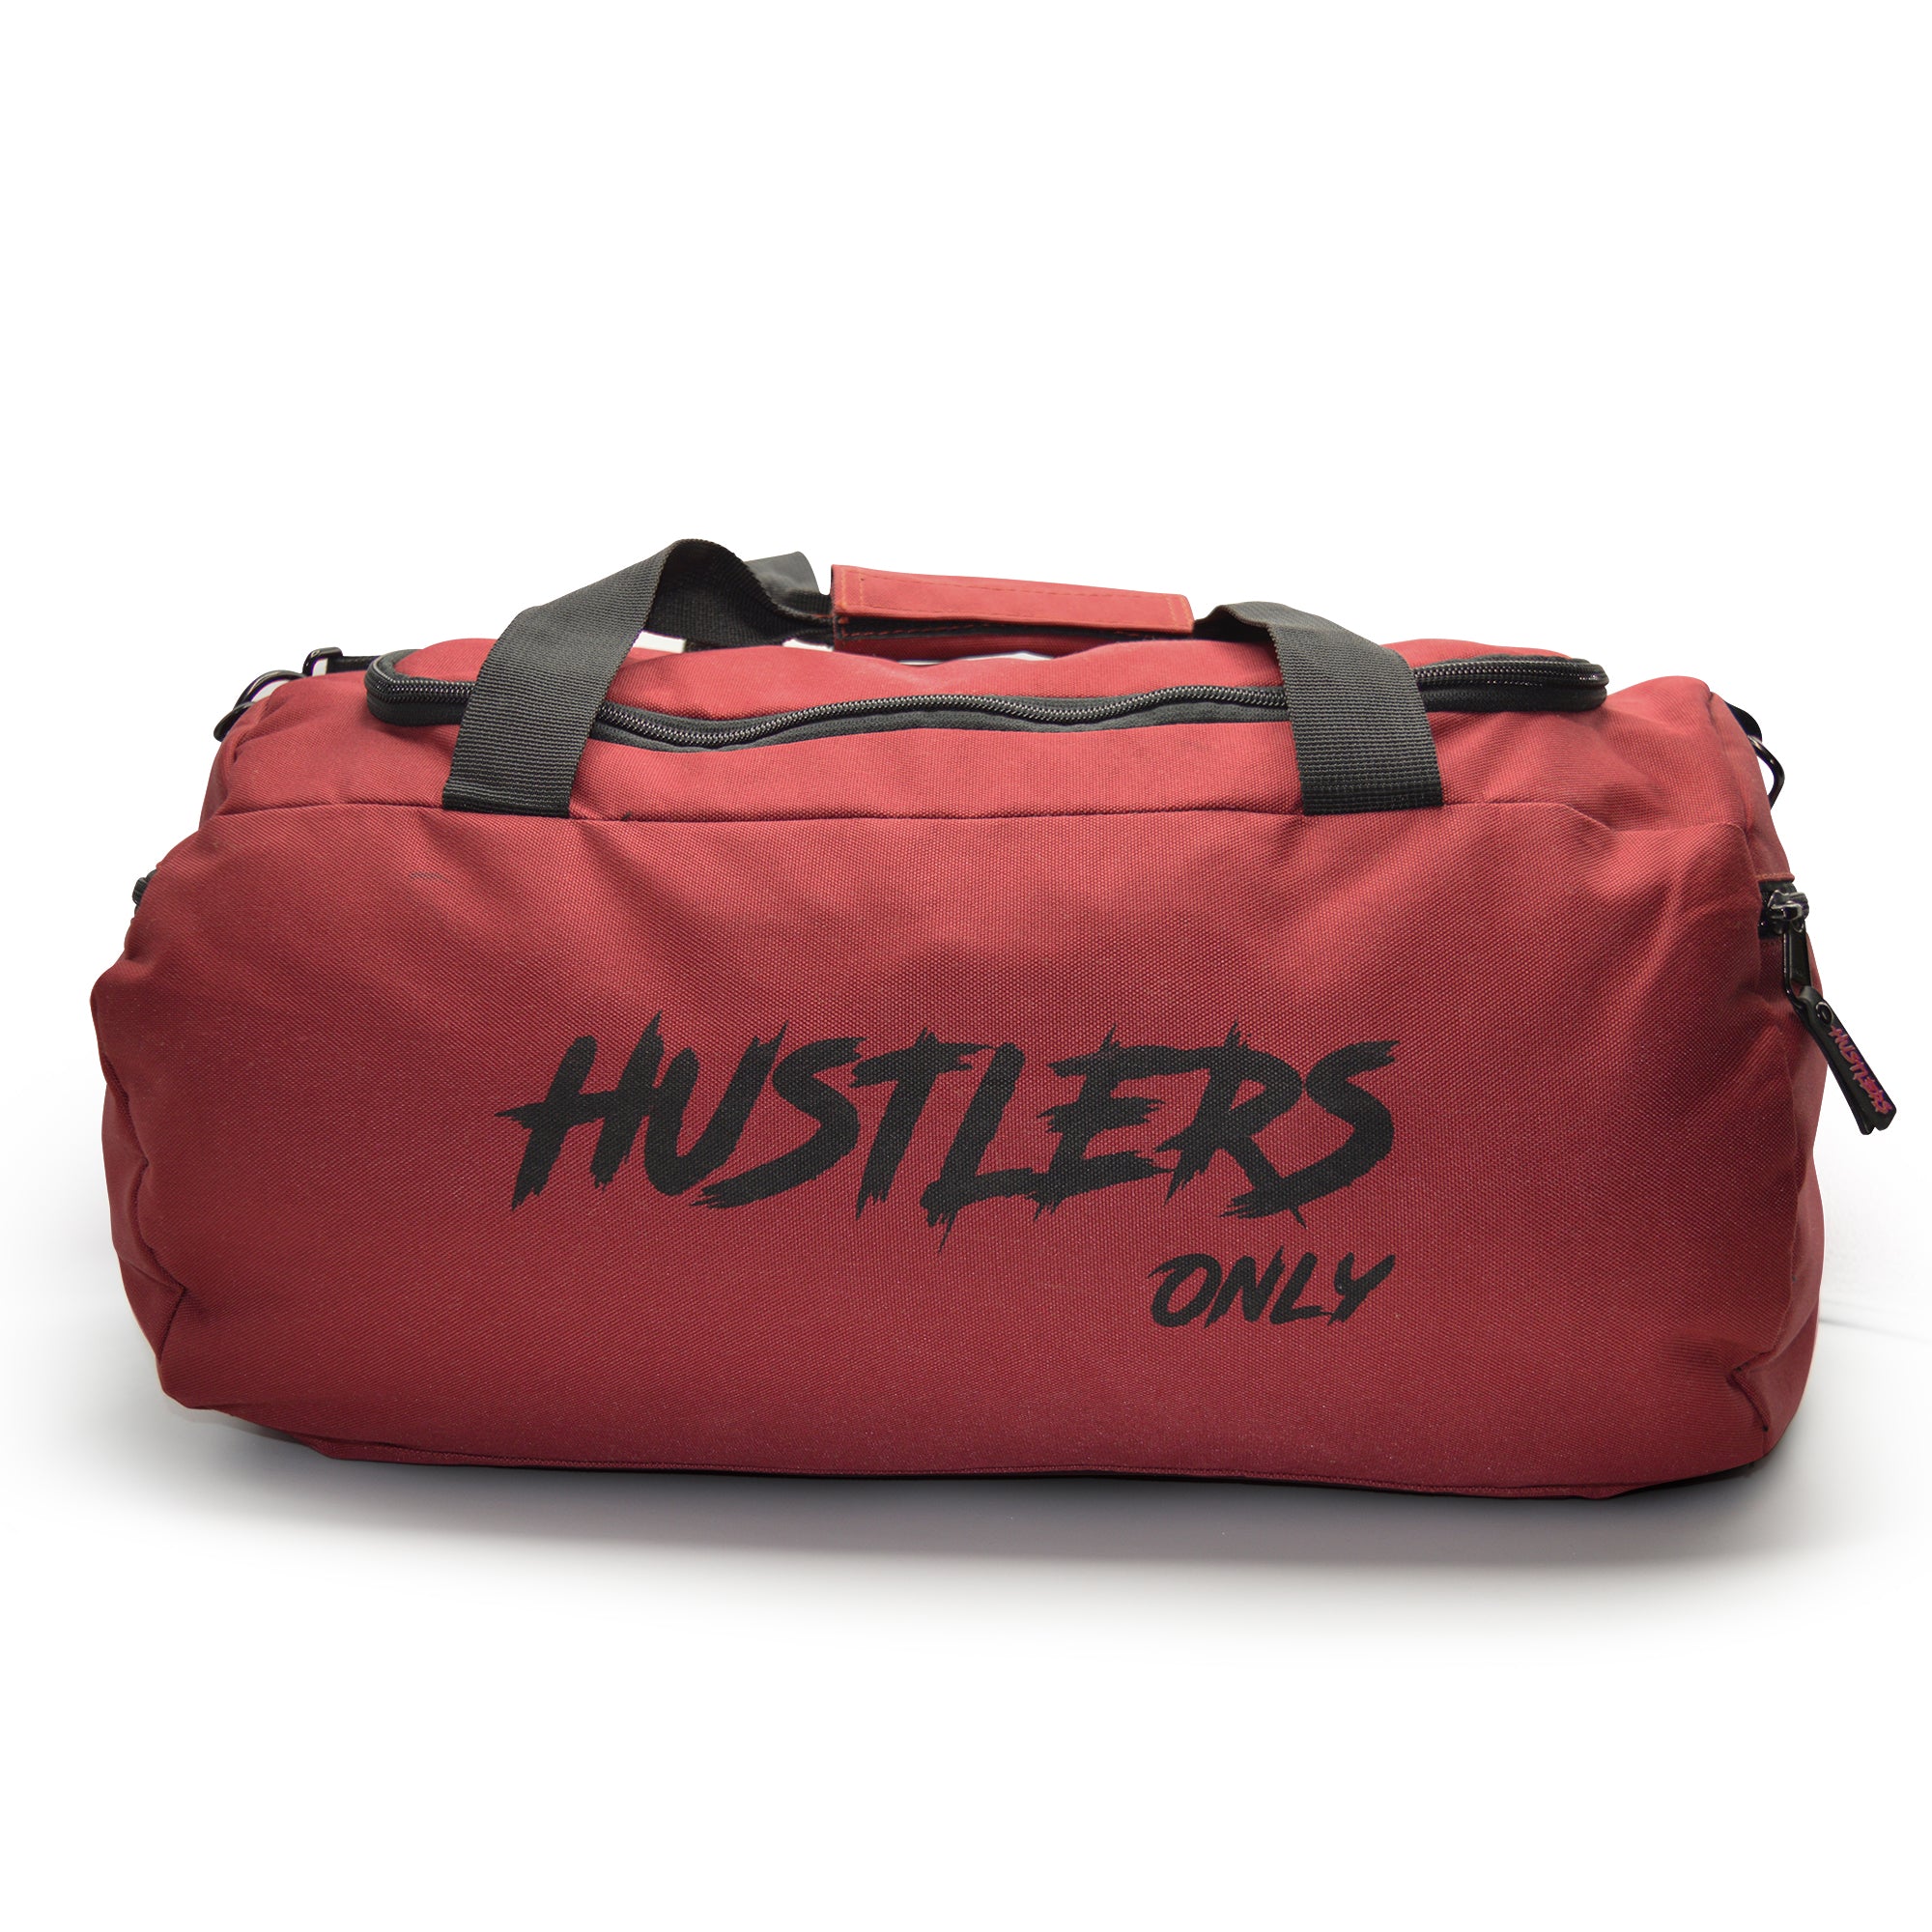 Buy online Lv Travelling, Gym And Sports Bag In Pakistan, Rs 5500, Best  Price